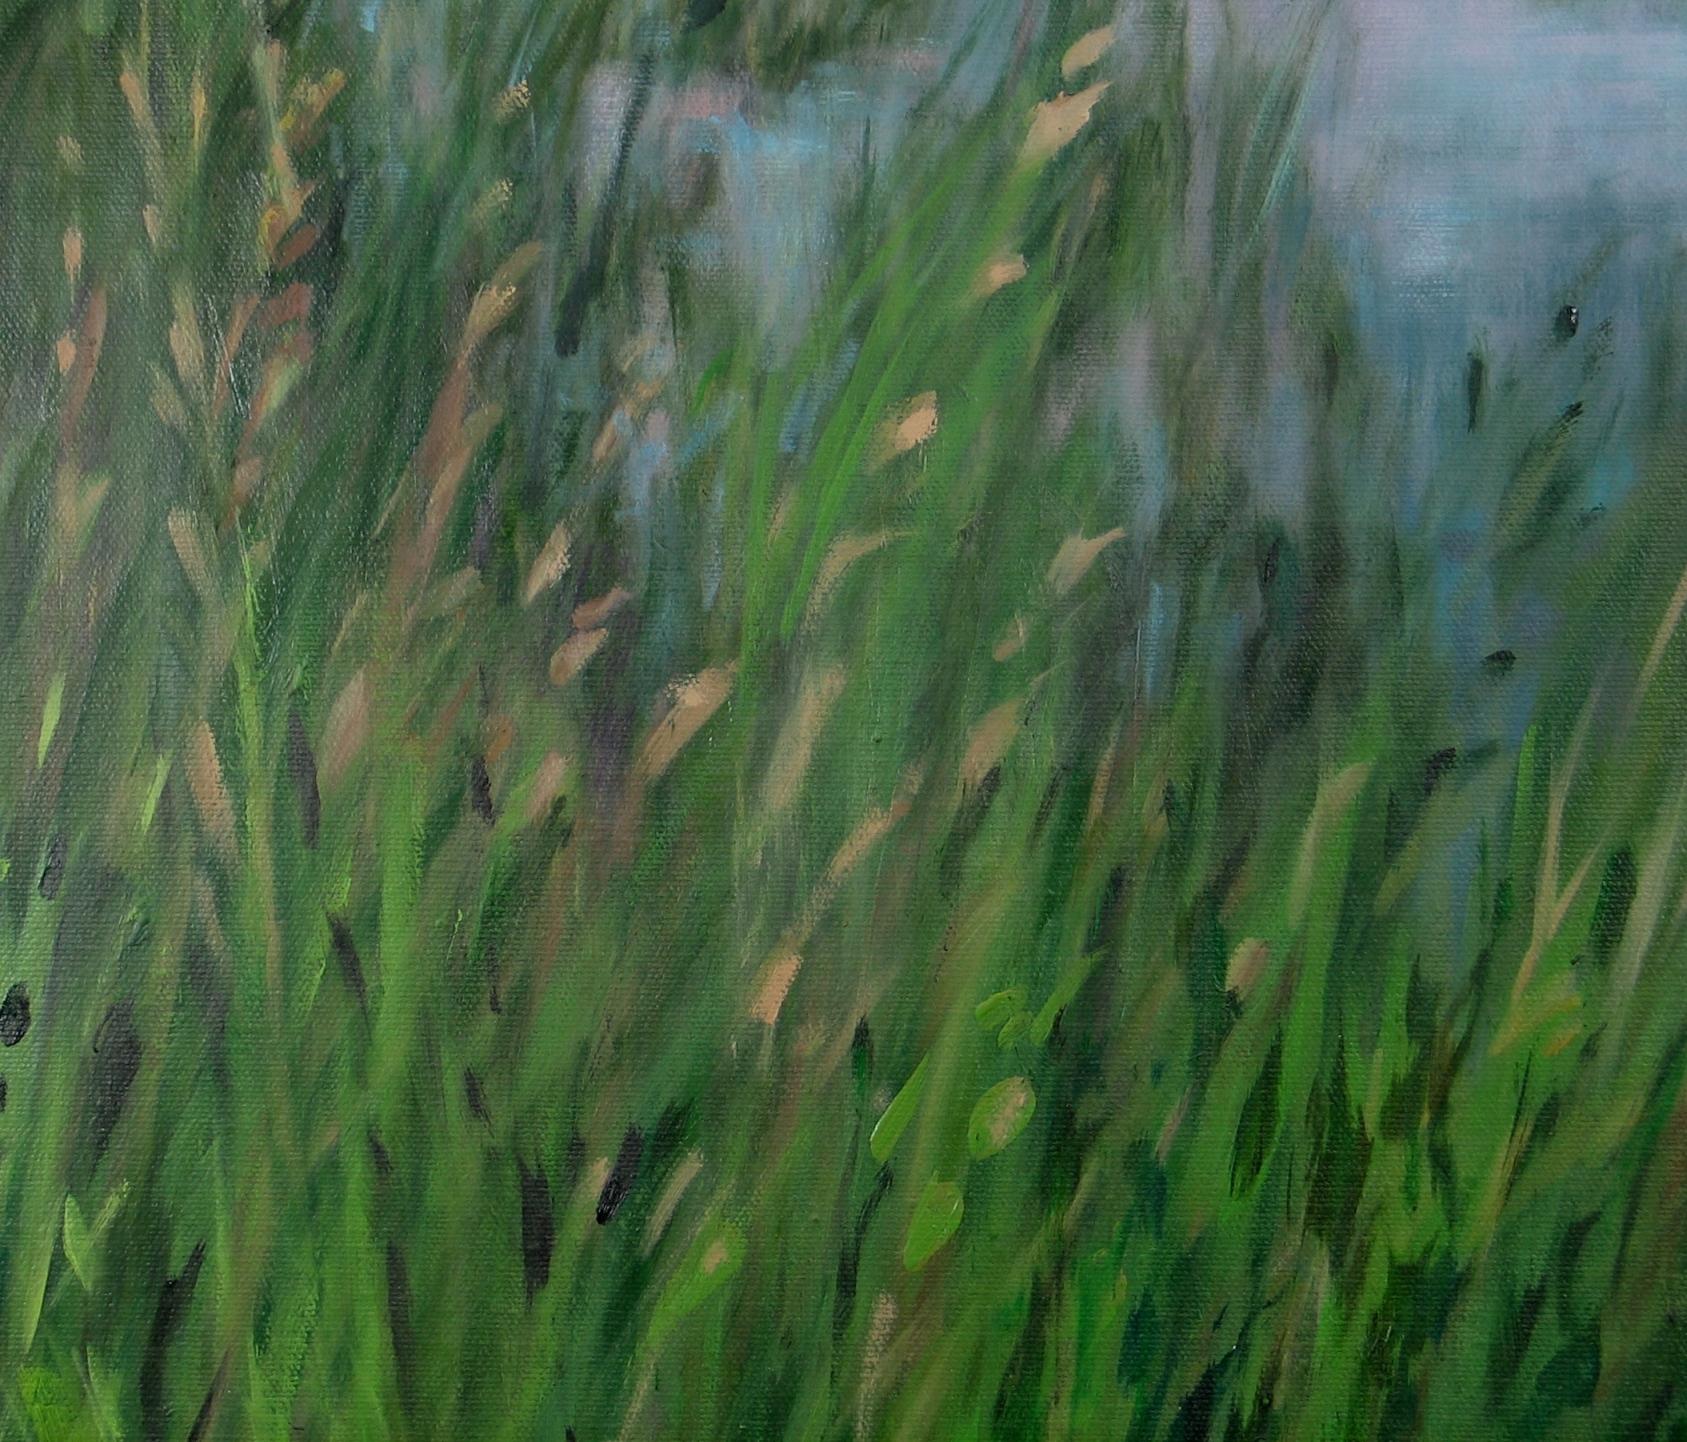 Lake In The Prairie - Impressionist Painting by Suzanne Massion